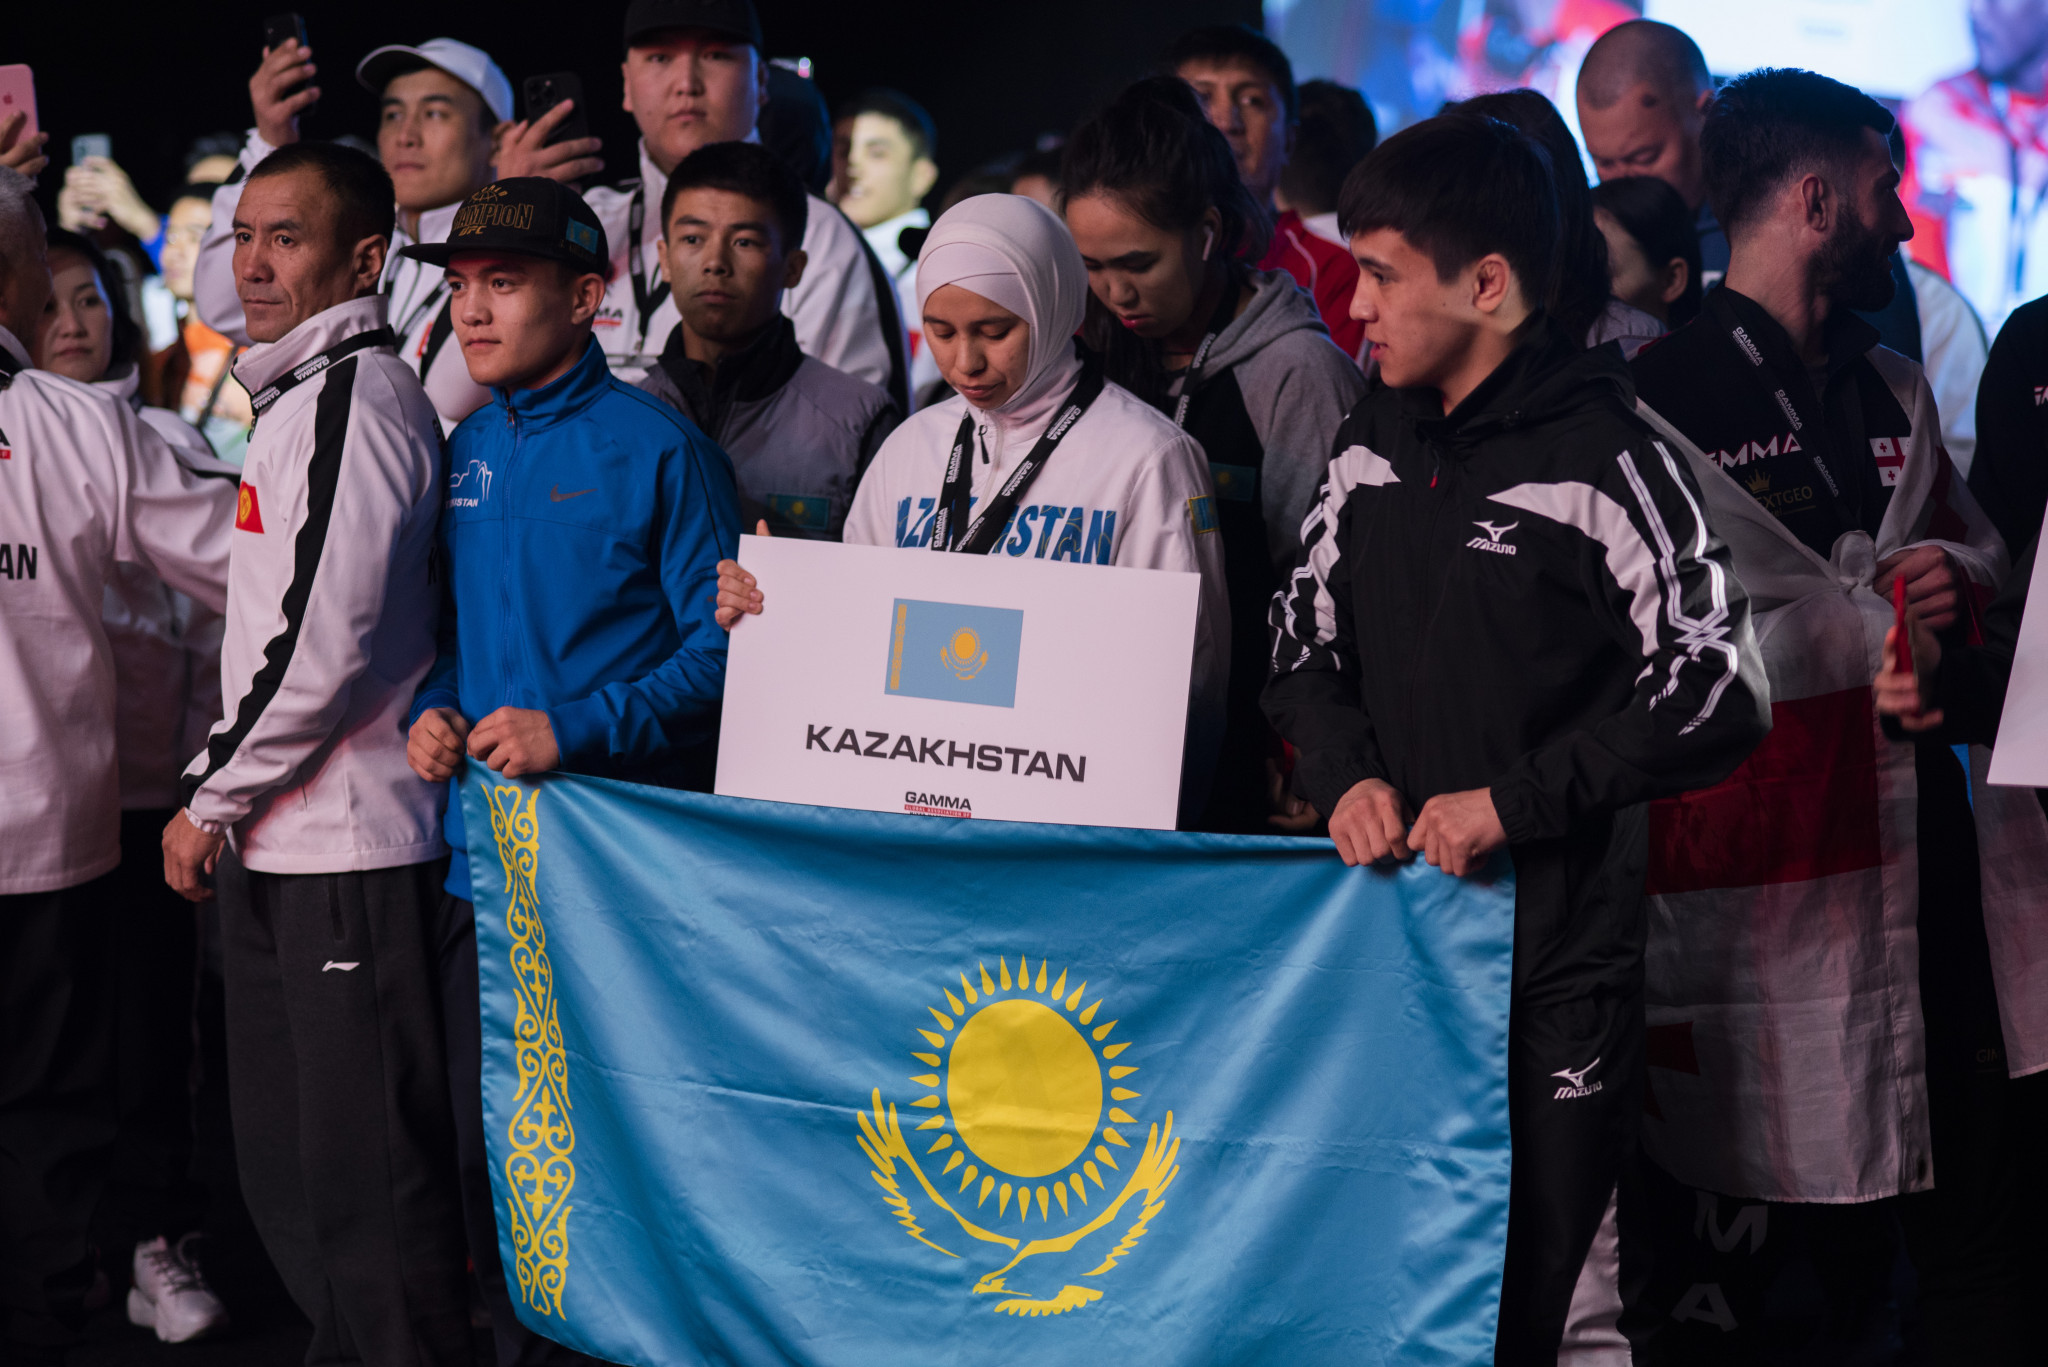 Kazakhstan are one of the favourites to top the medals table and have 21 representatives to help them achieve it, one of the biggest delegations at the event ©GAMMA